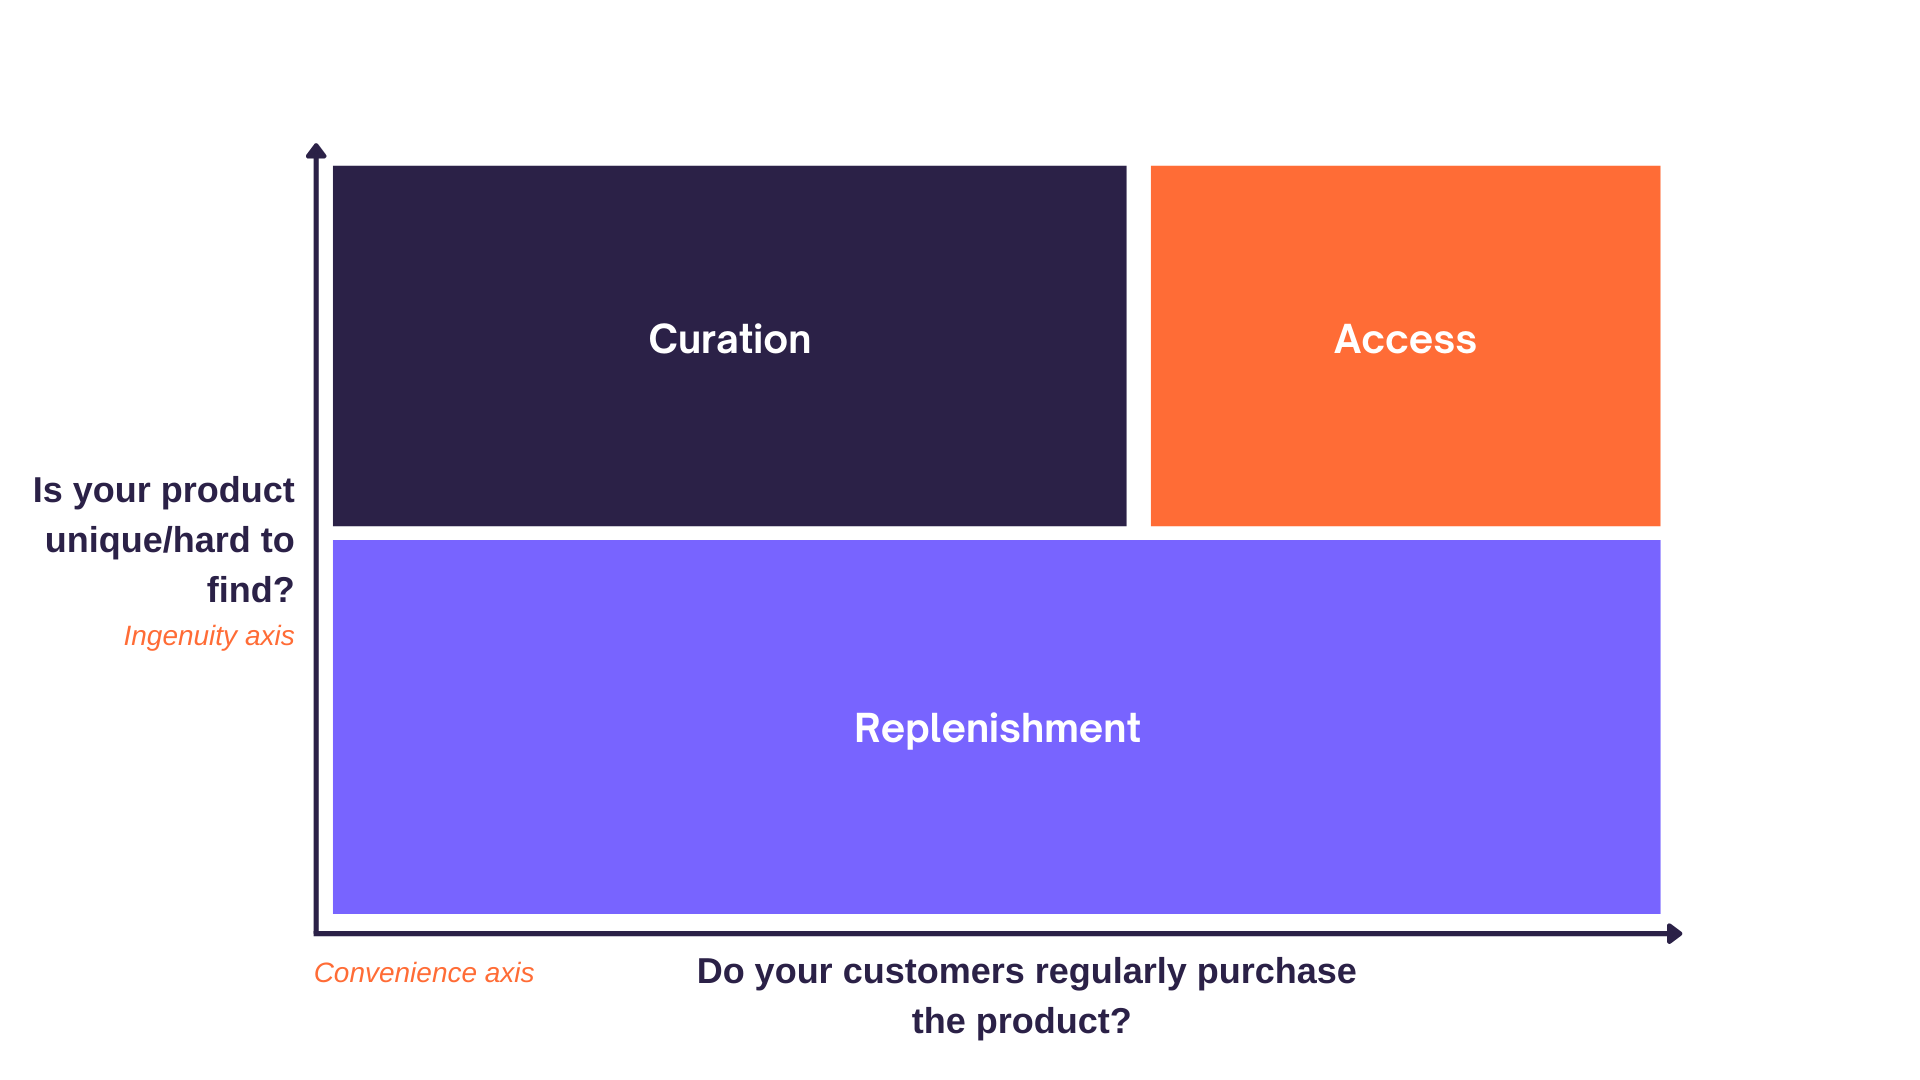 Ingenuity-Convenience Matrix to evaluate subscription box business model